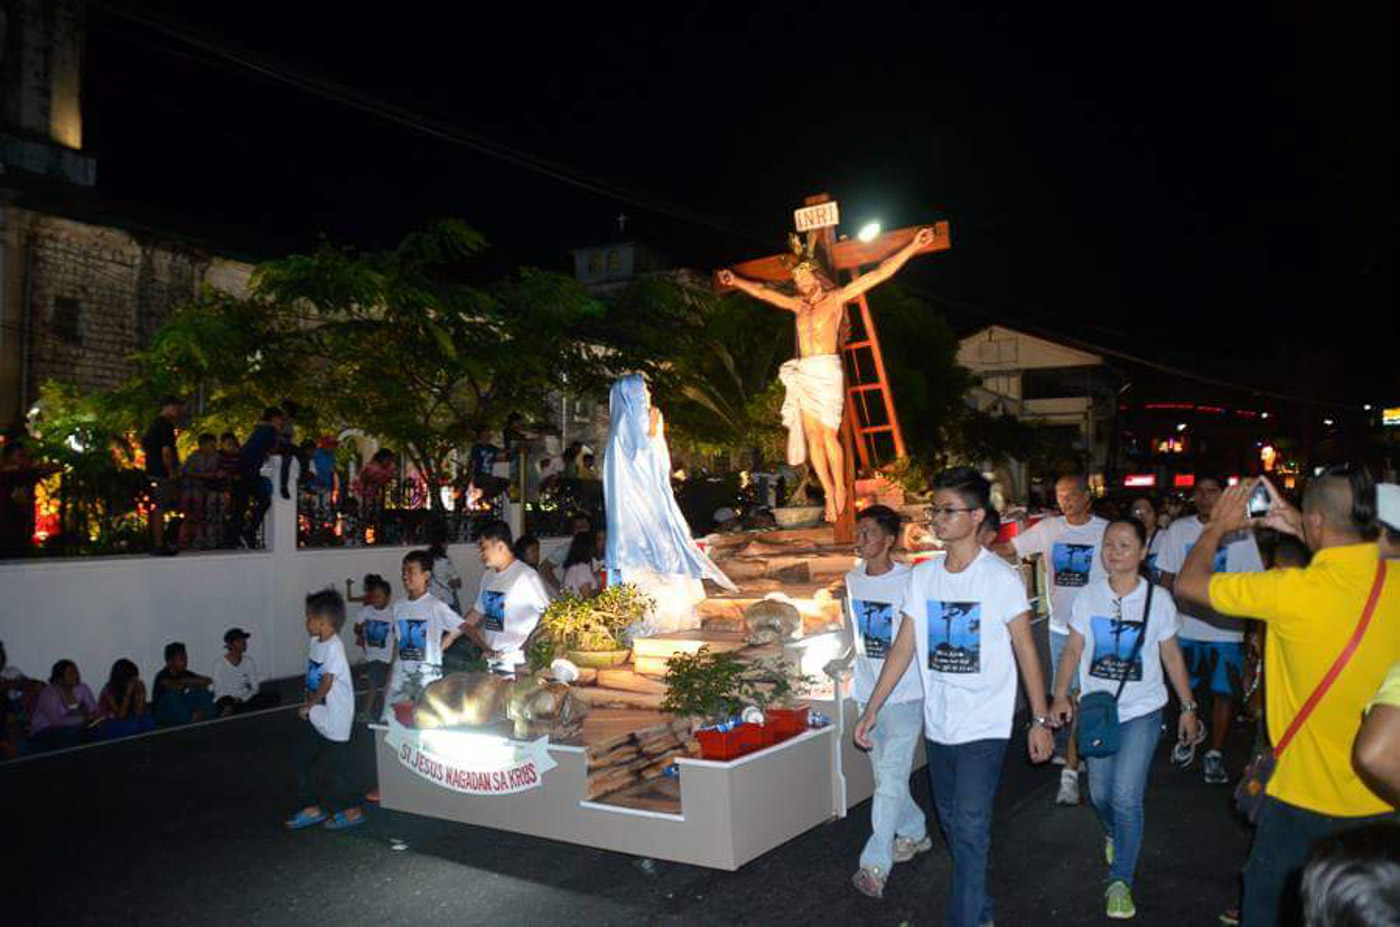 The purpose of Holy Week processions